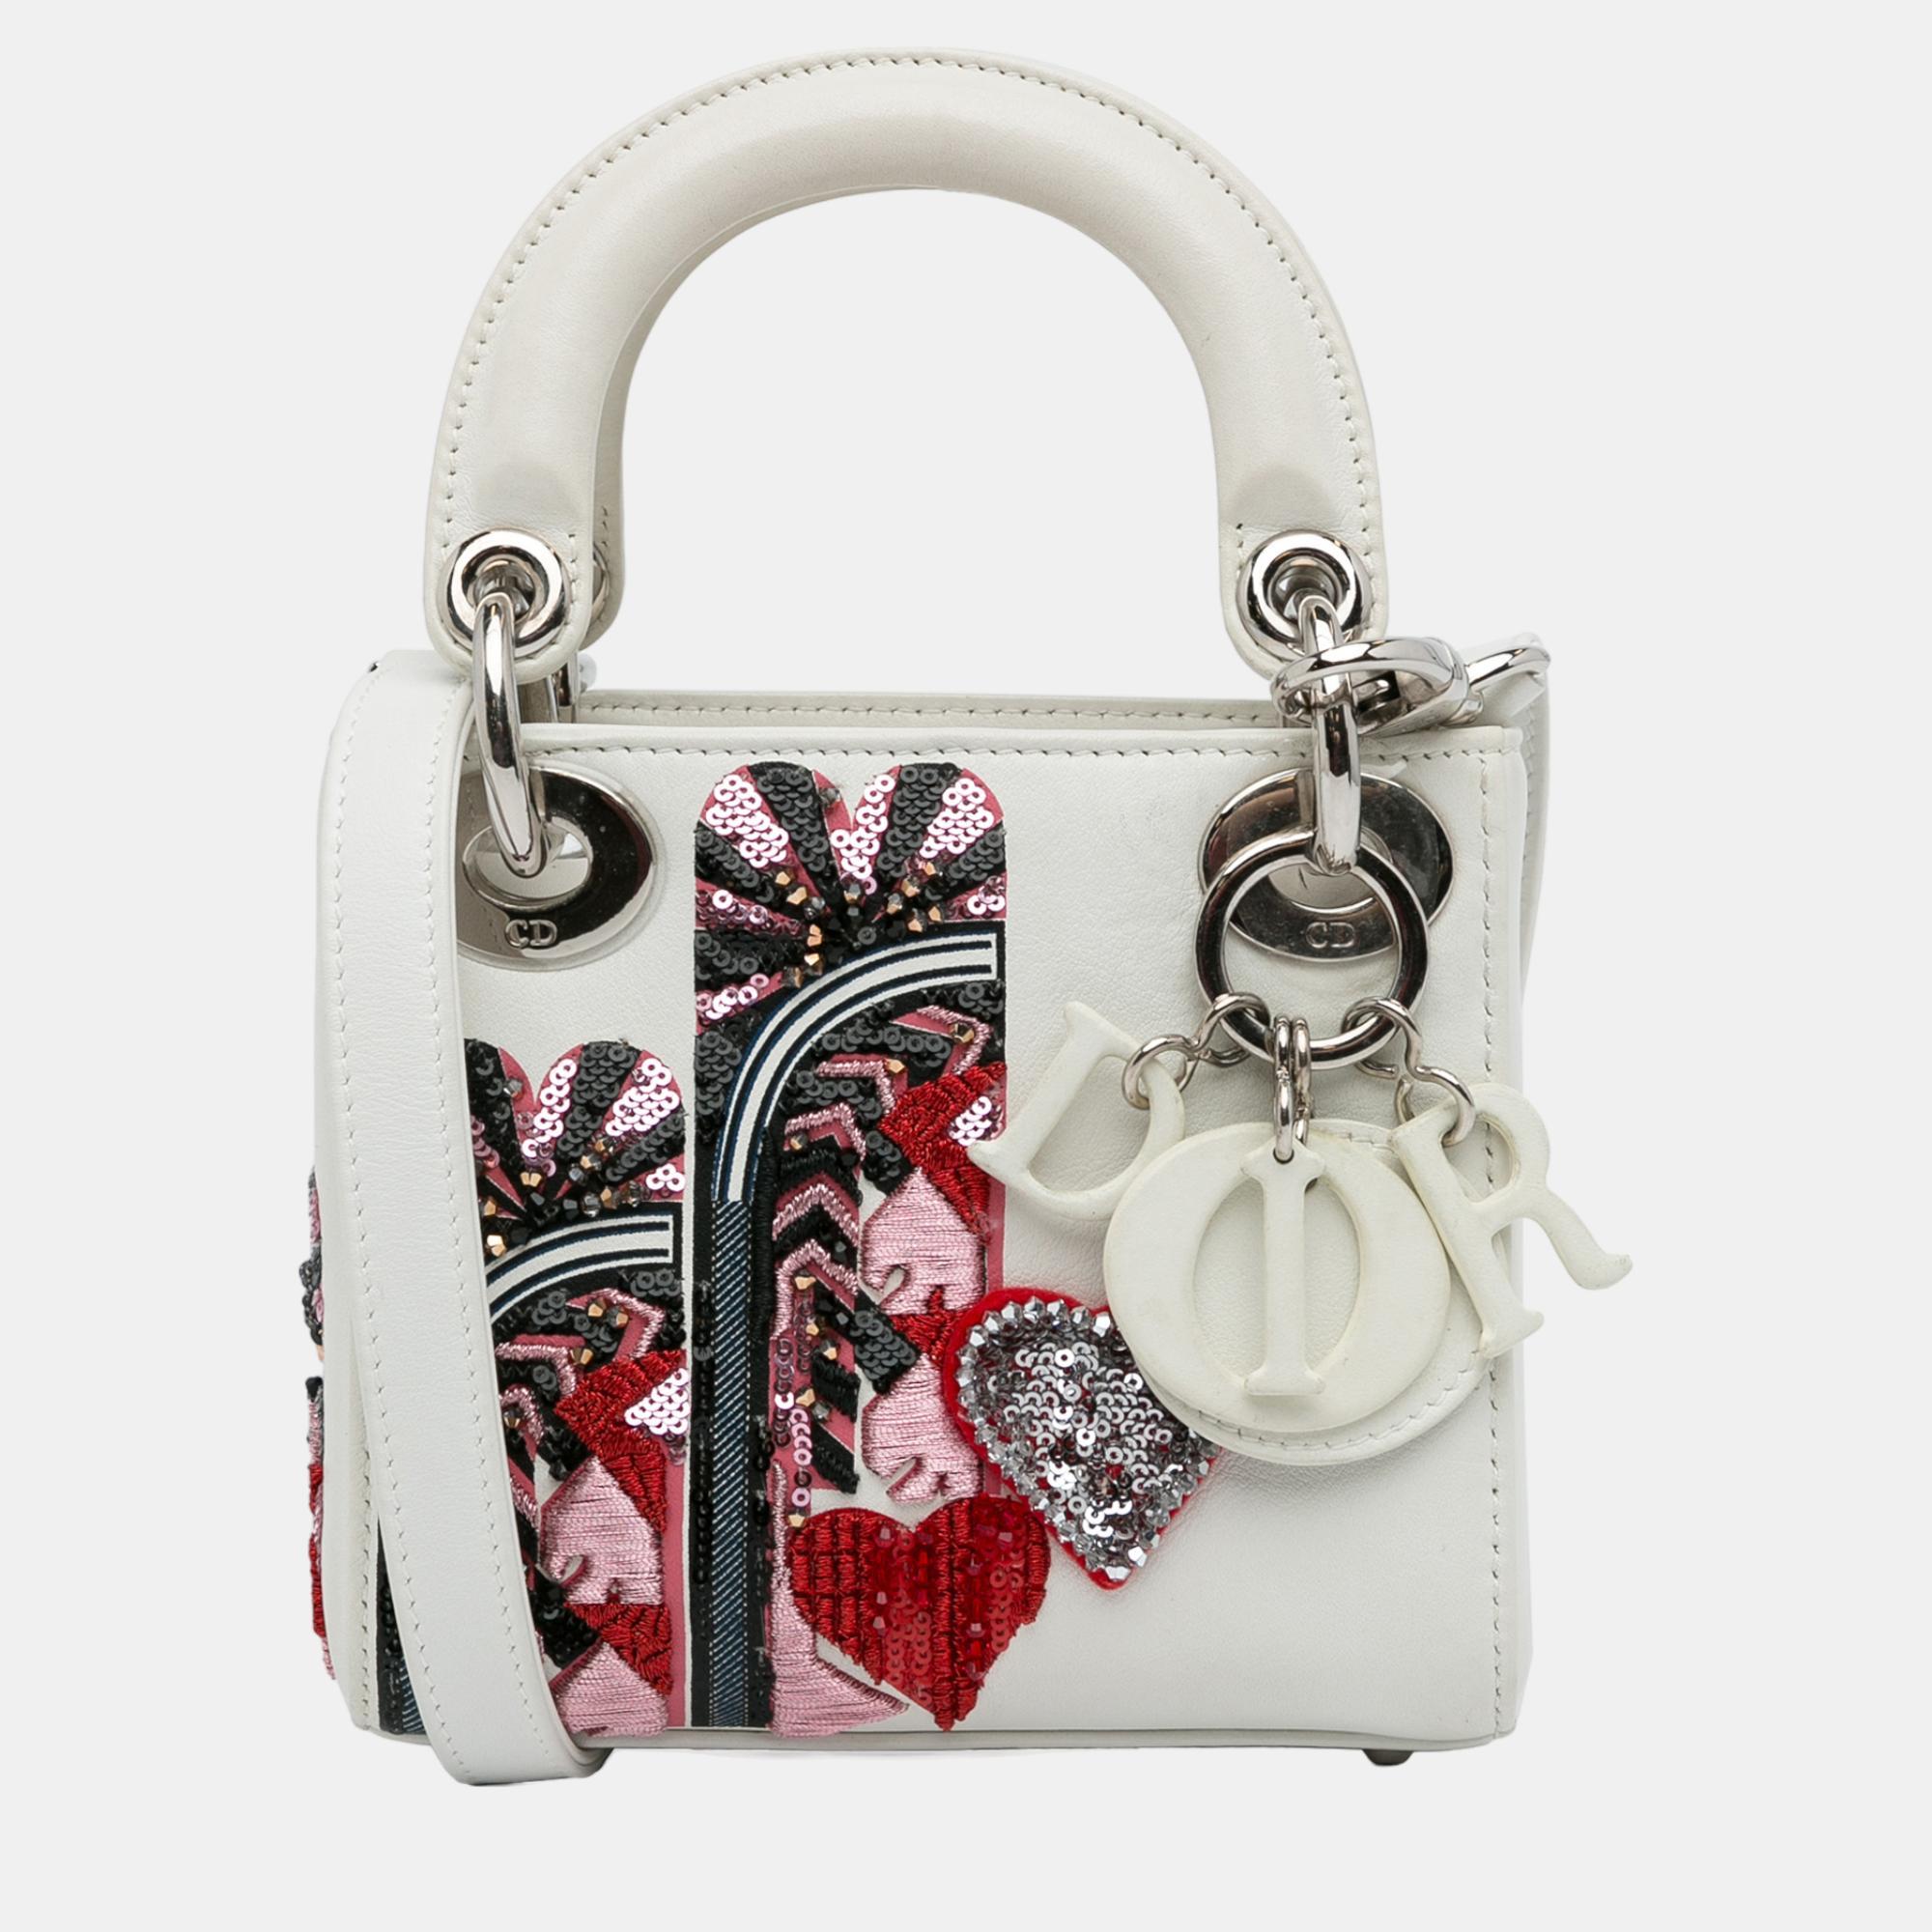 Dior white micro sequin accented lady dior bag